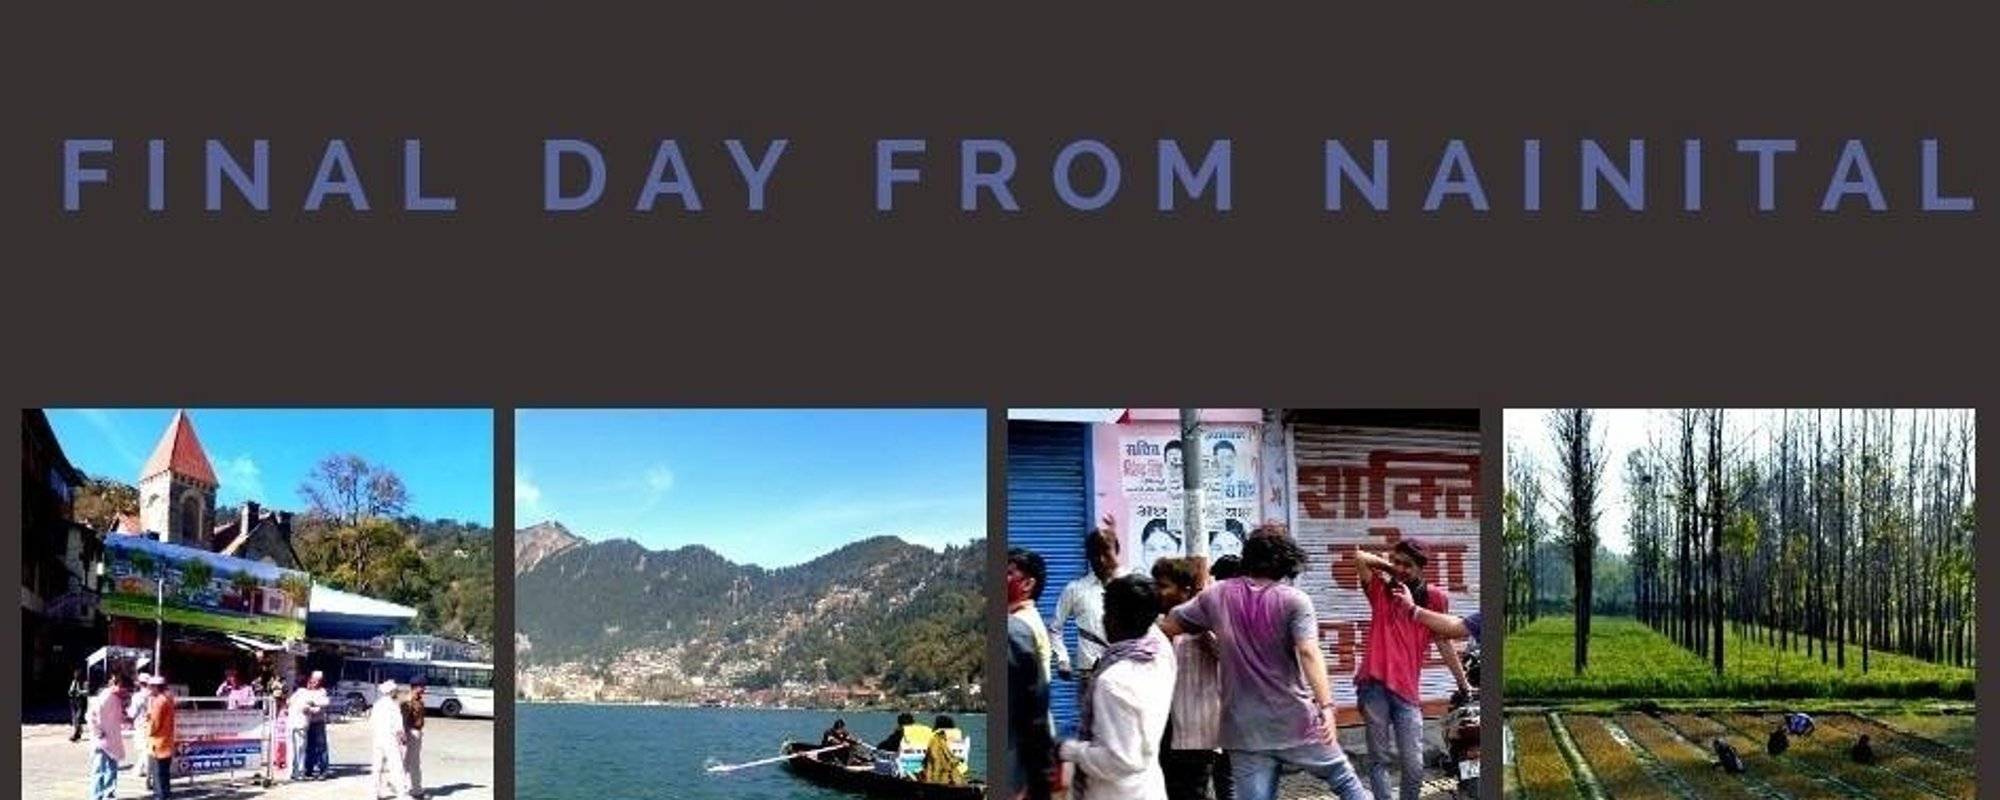 SNIPPETS FROM MY TRAVEL DIARY; PAGE 9 - Final Day From Nainital